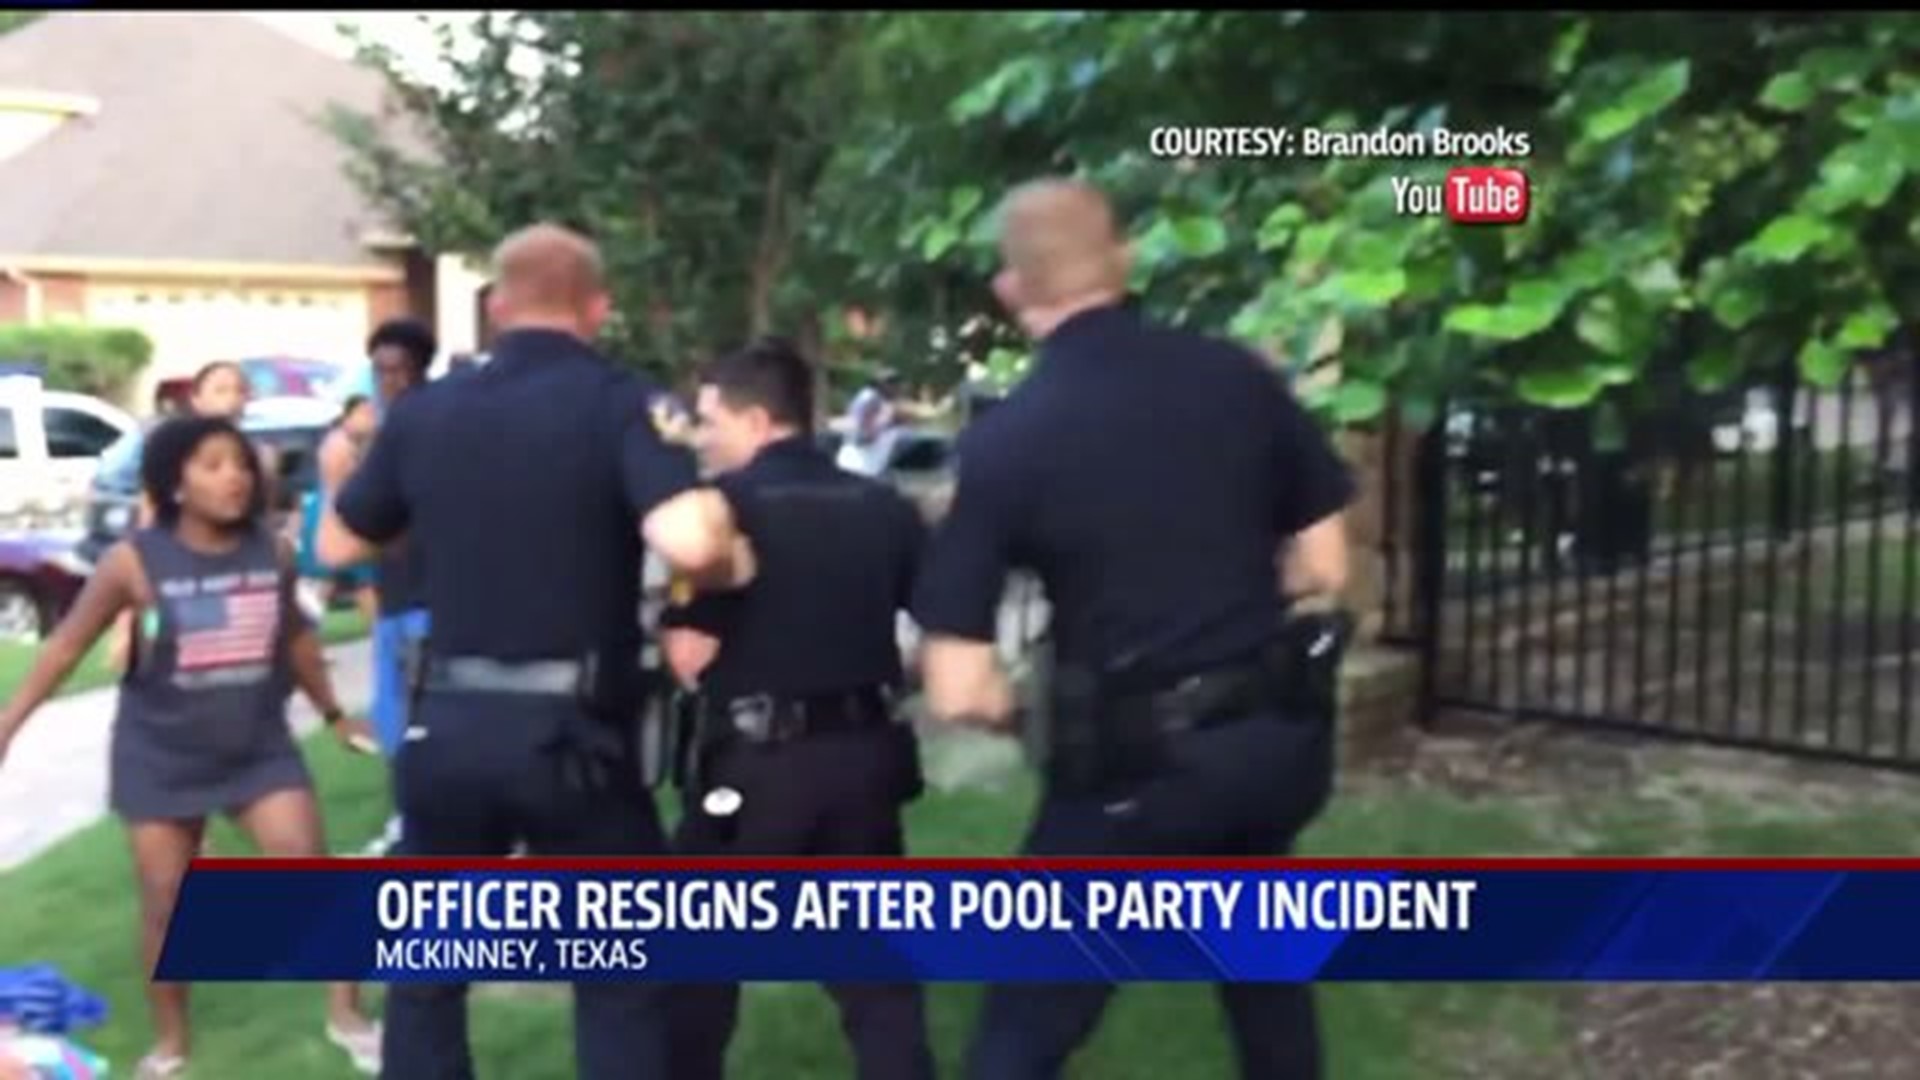 Police Officer involved in pool party incident resigns